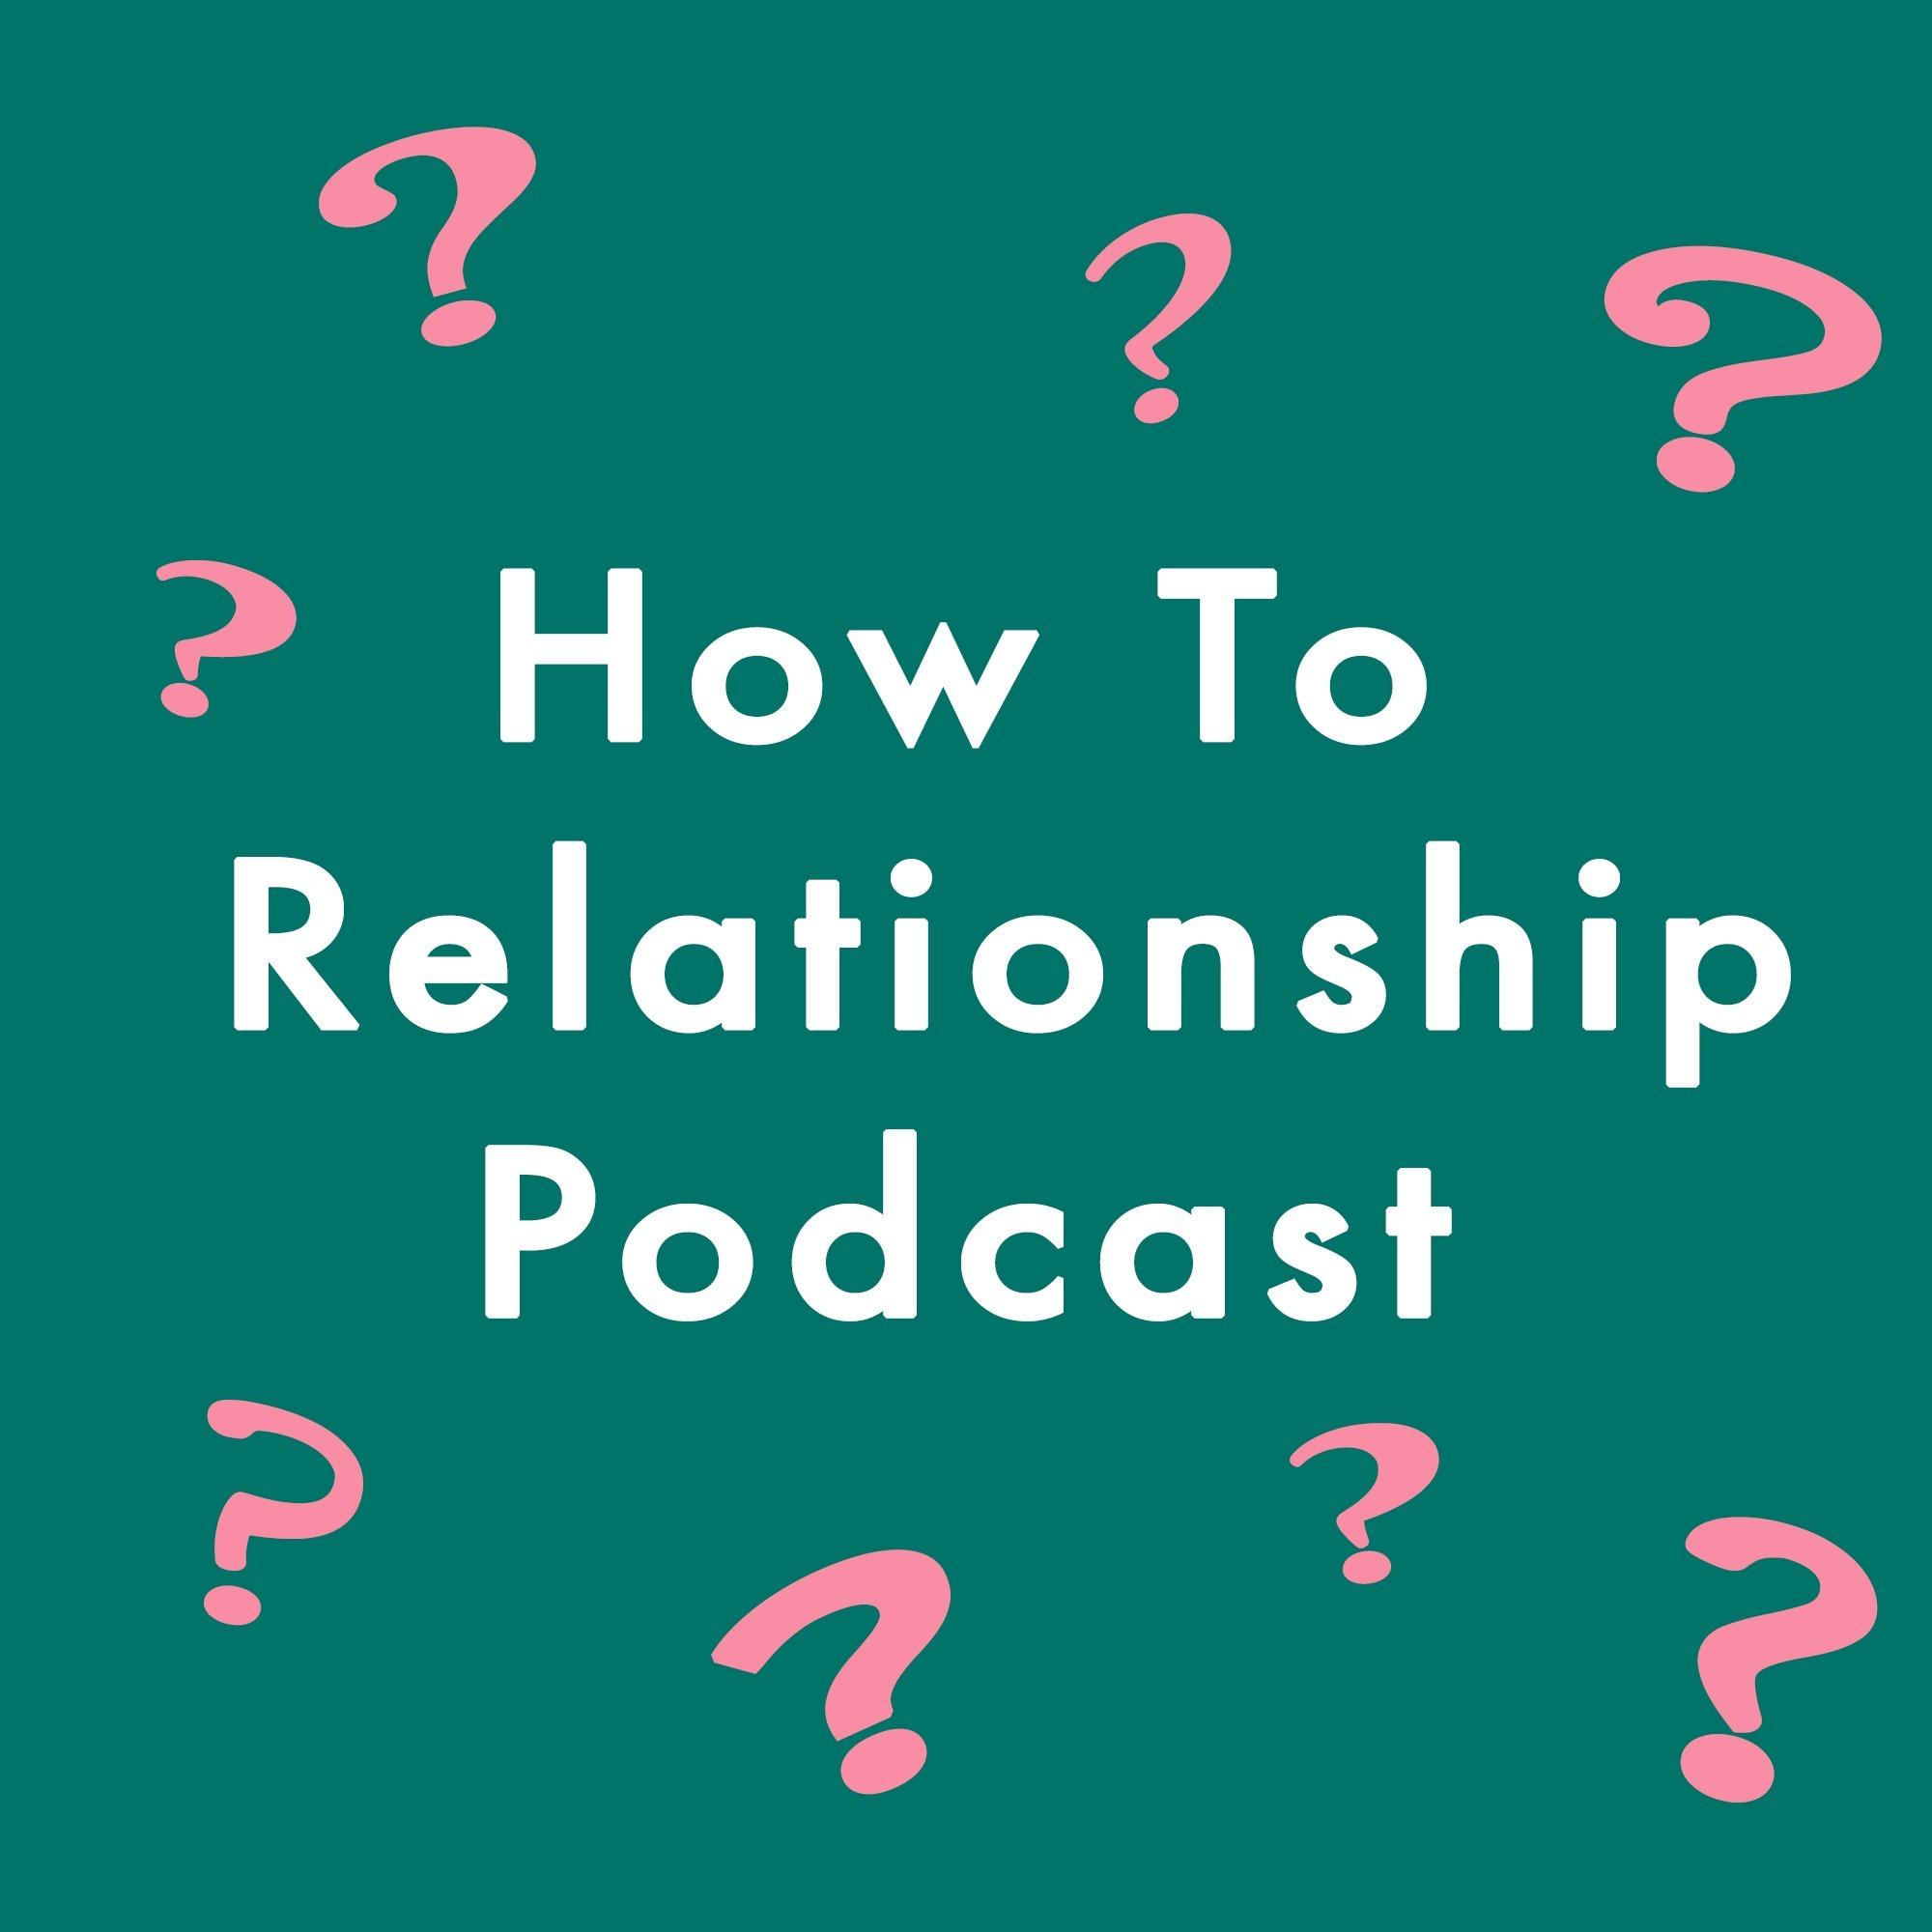 How To Relationship Podcast